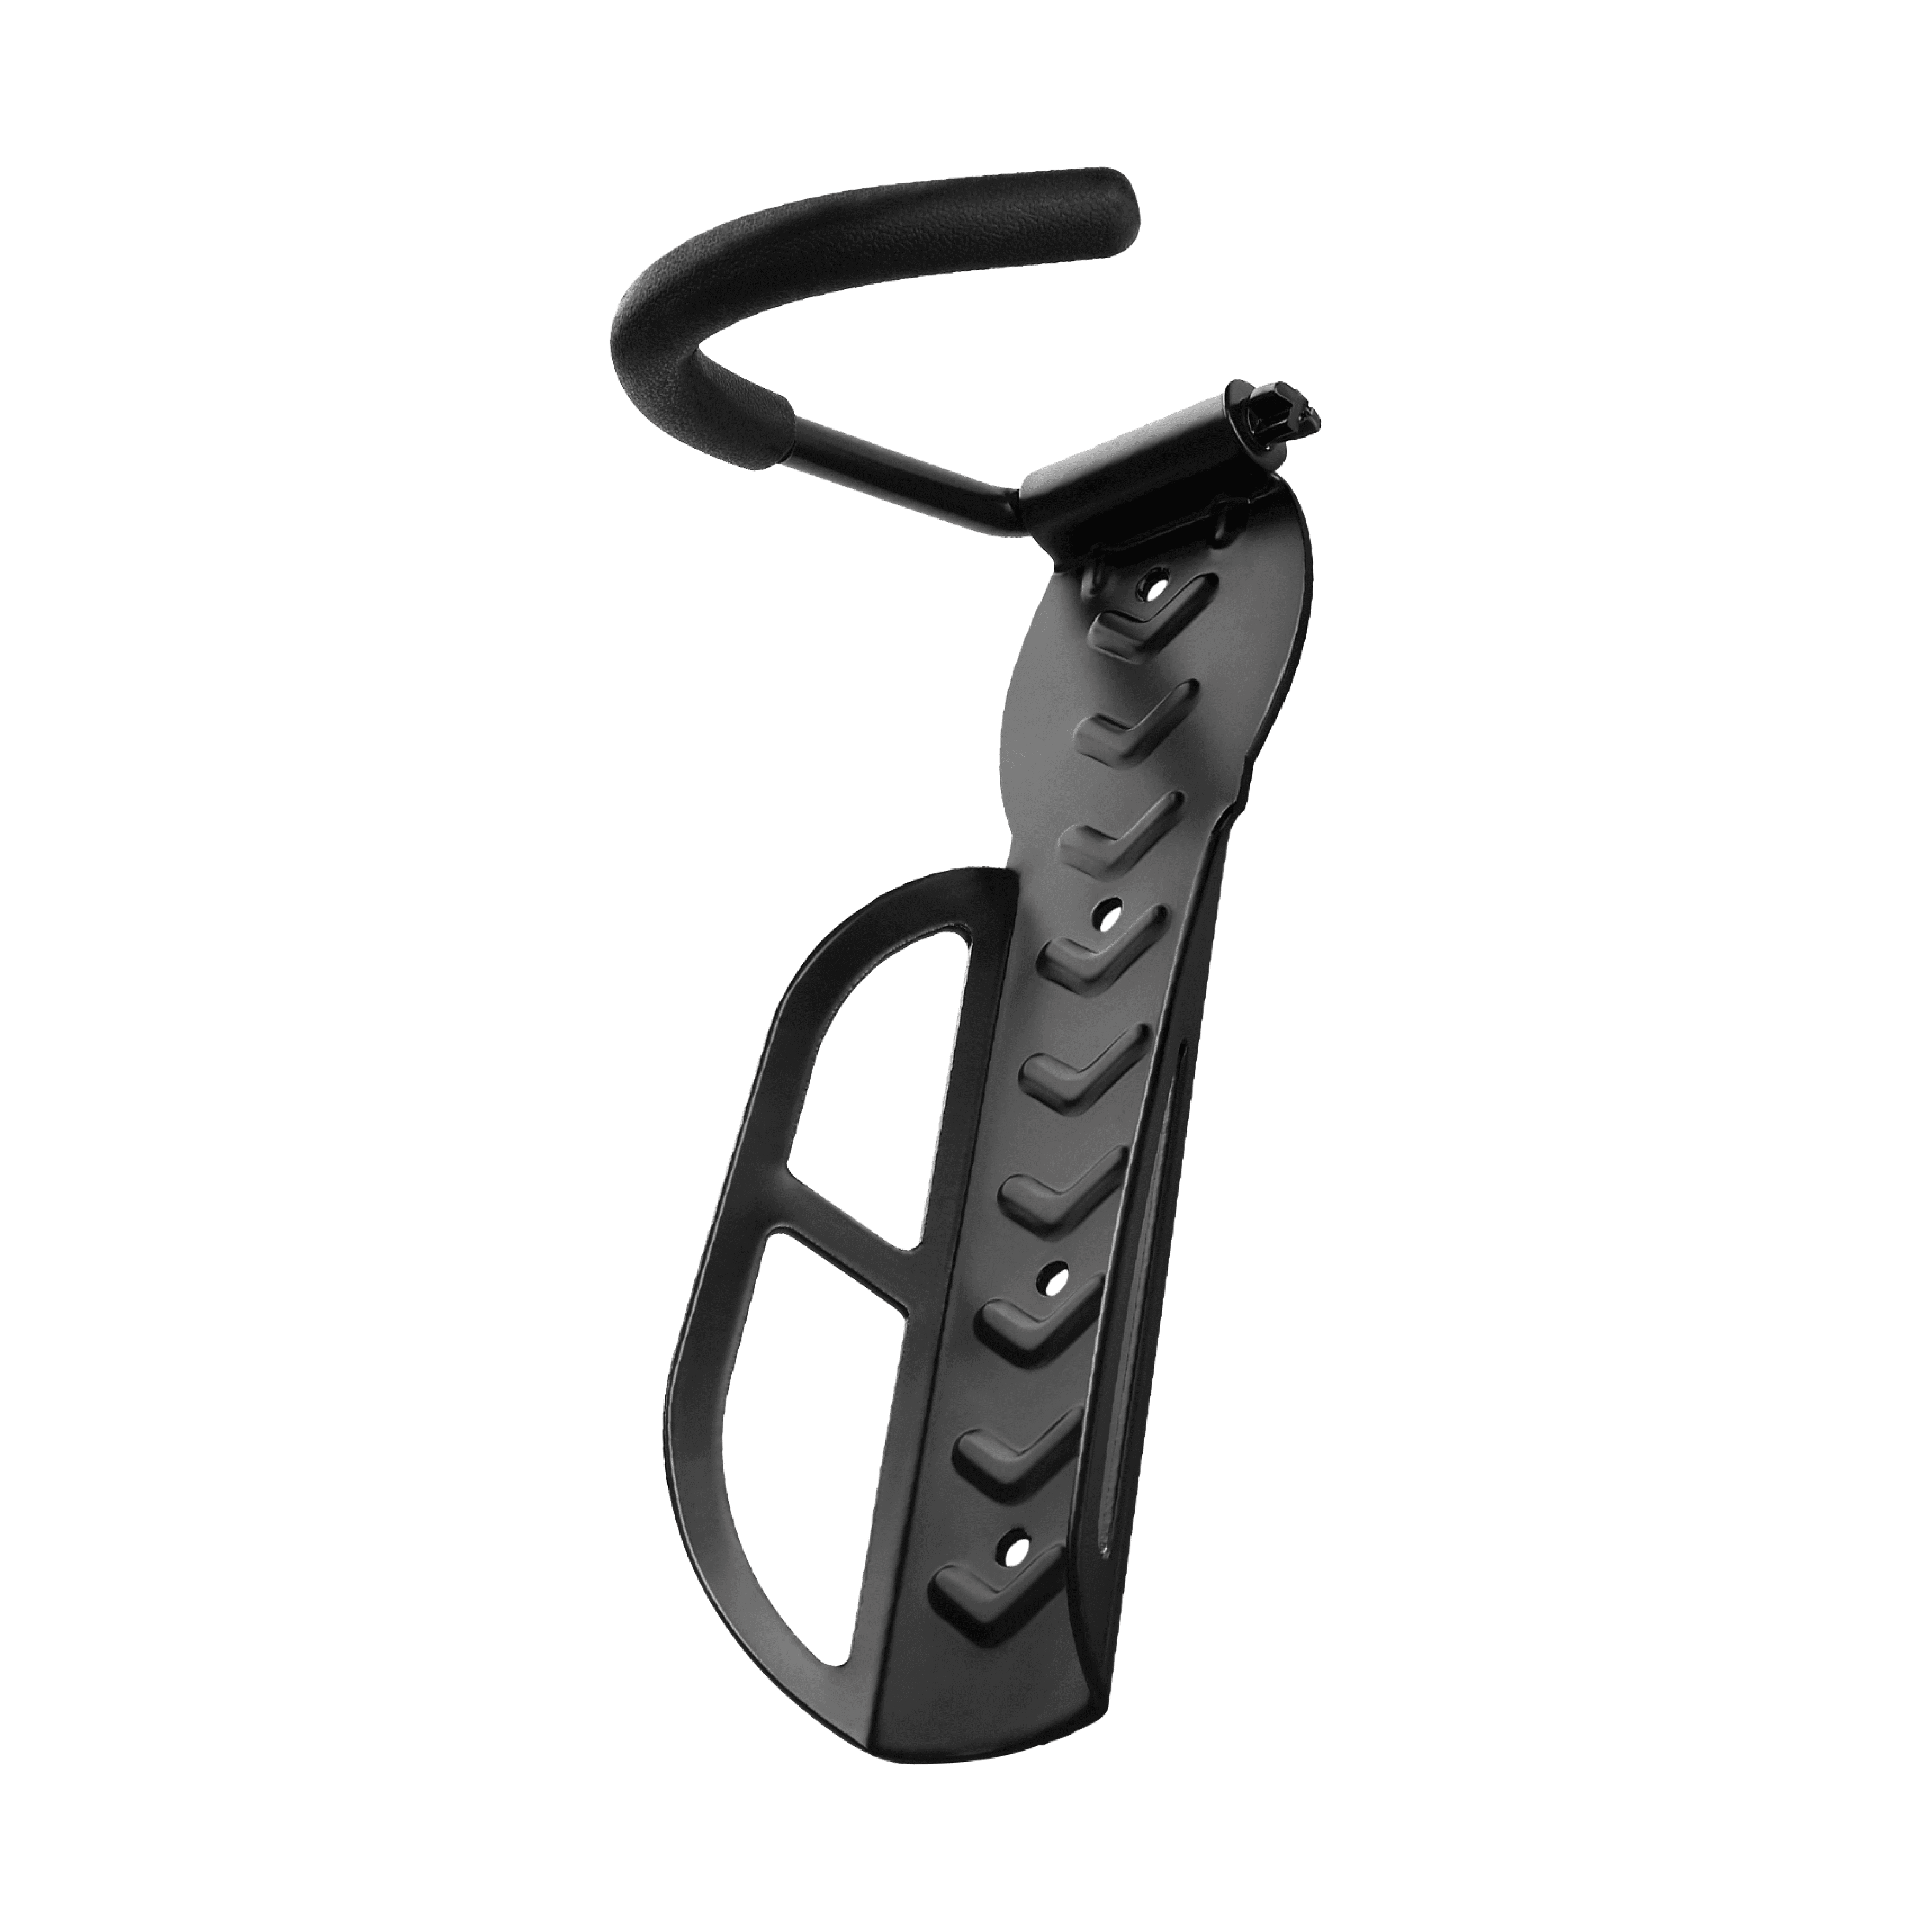 30KGS Weight Capacity Cycling Storage Hanger Stand Bicycle Bike Wall Mount Storage Rack Hanger Hook Holder Foldable 66LBS 